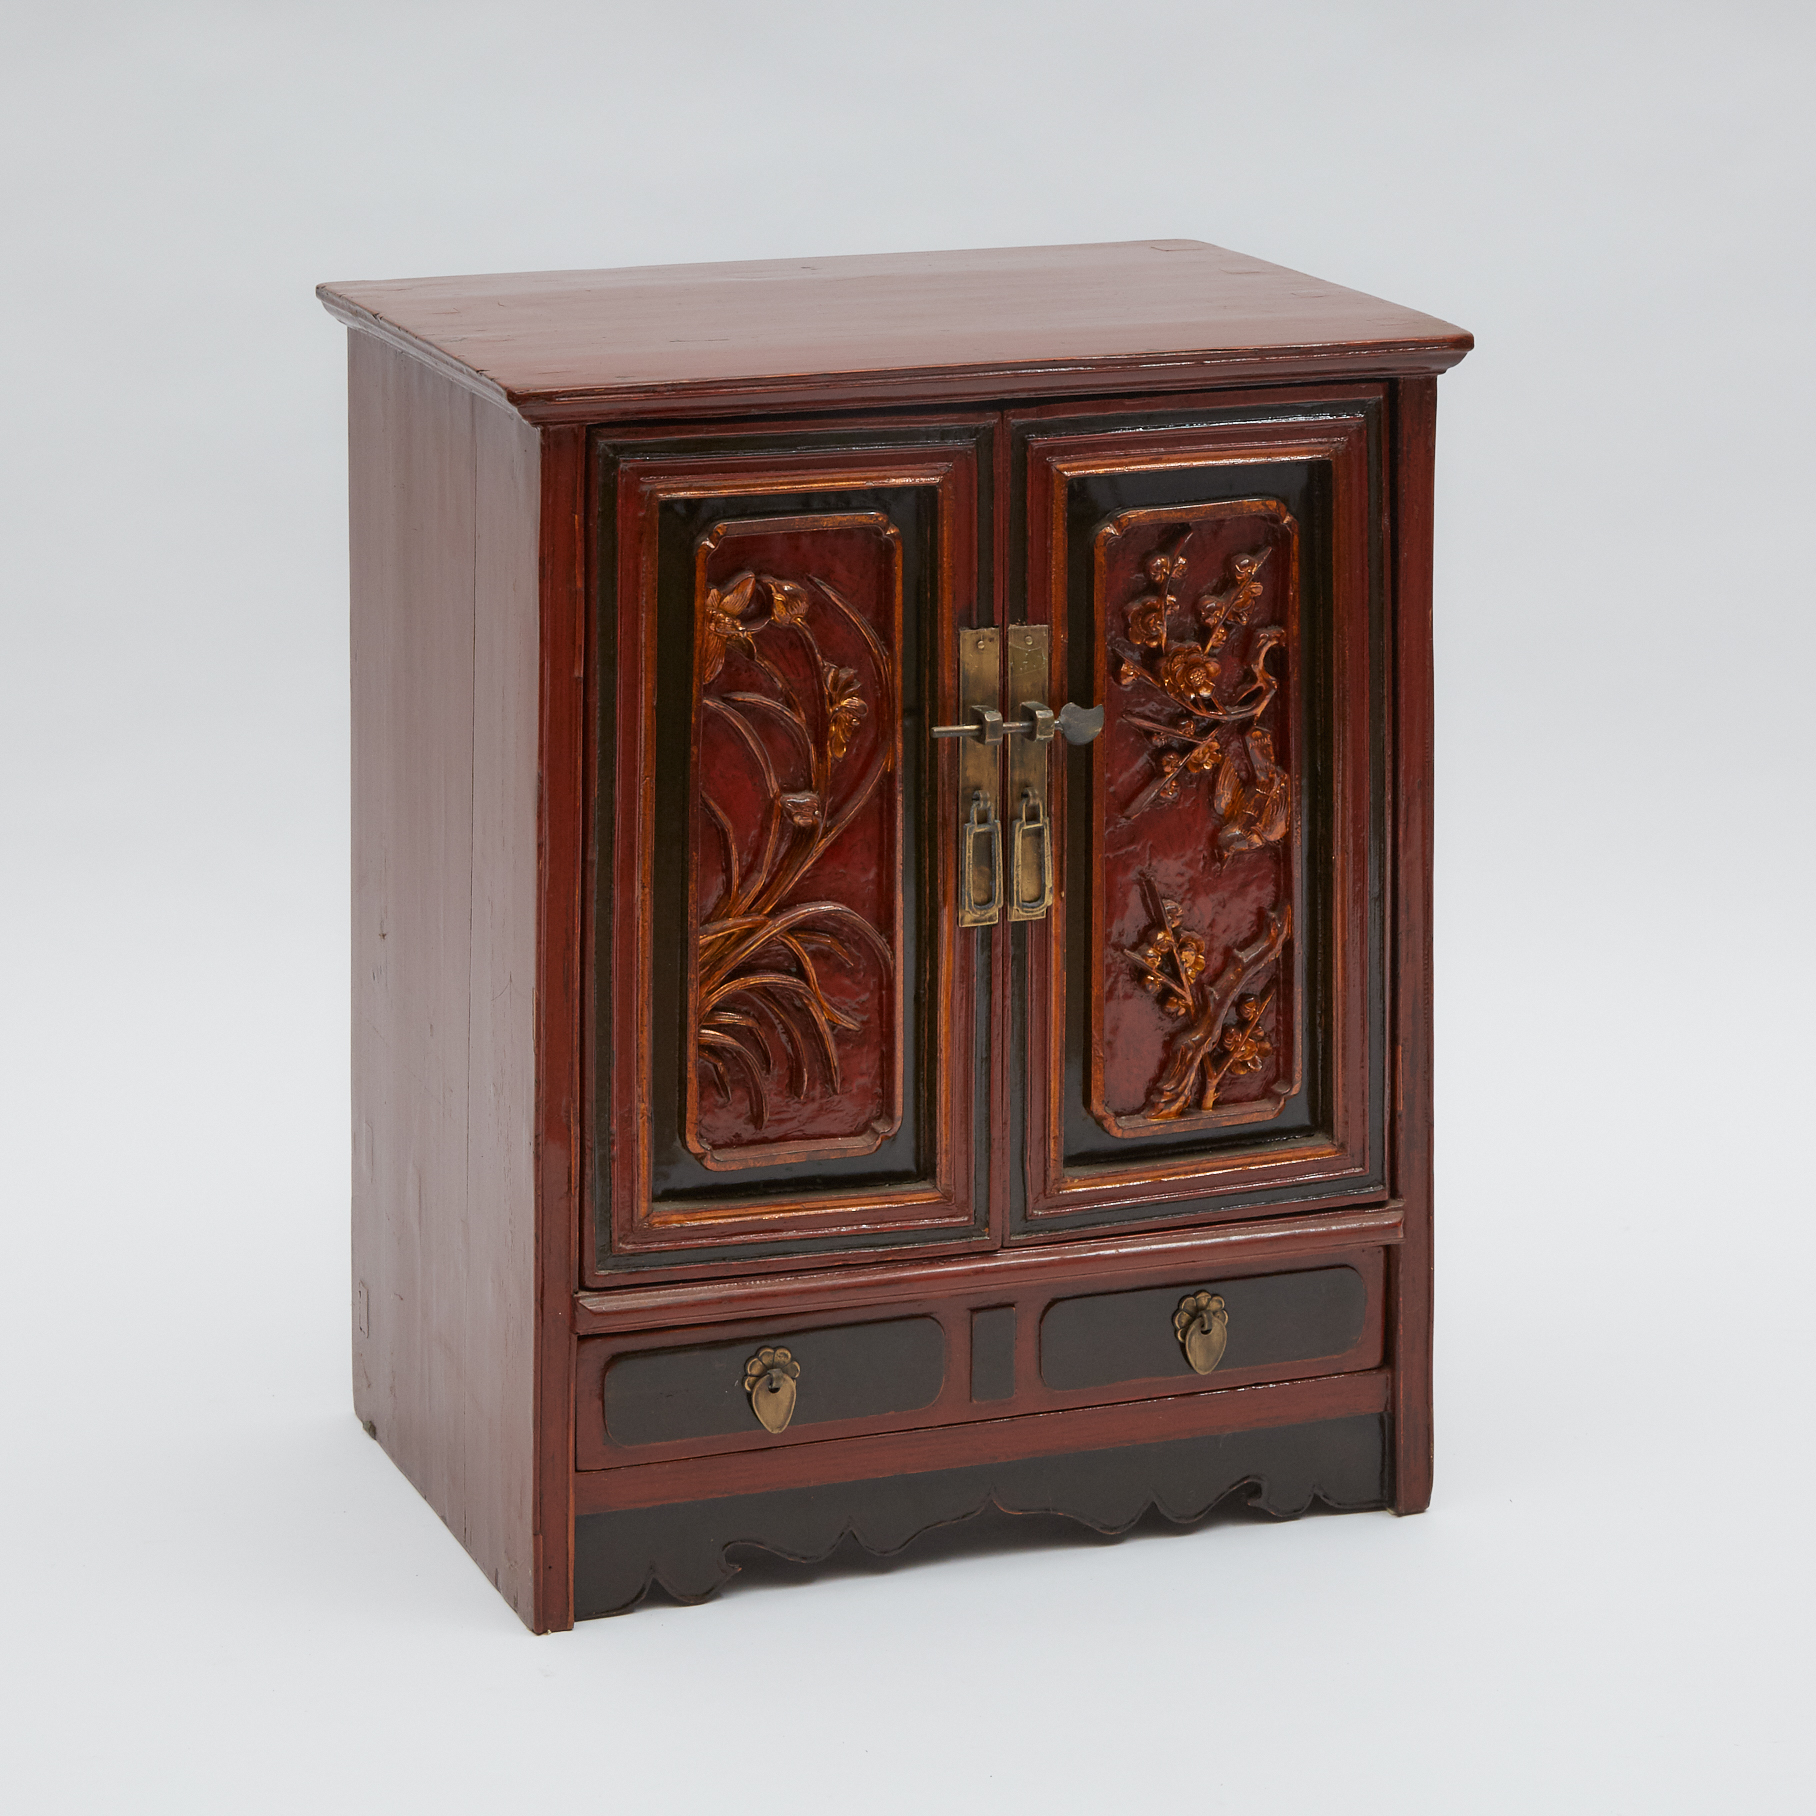 A Small Red Lacquer Cabinet